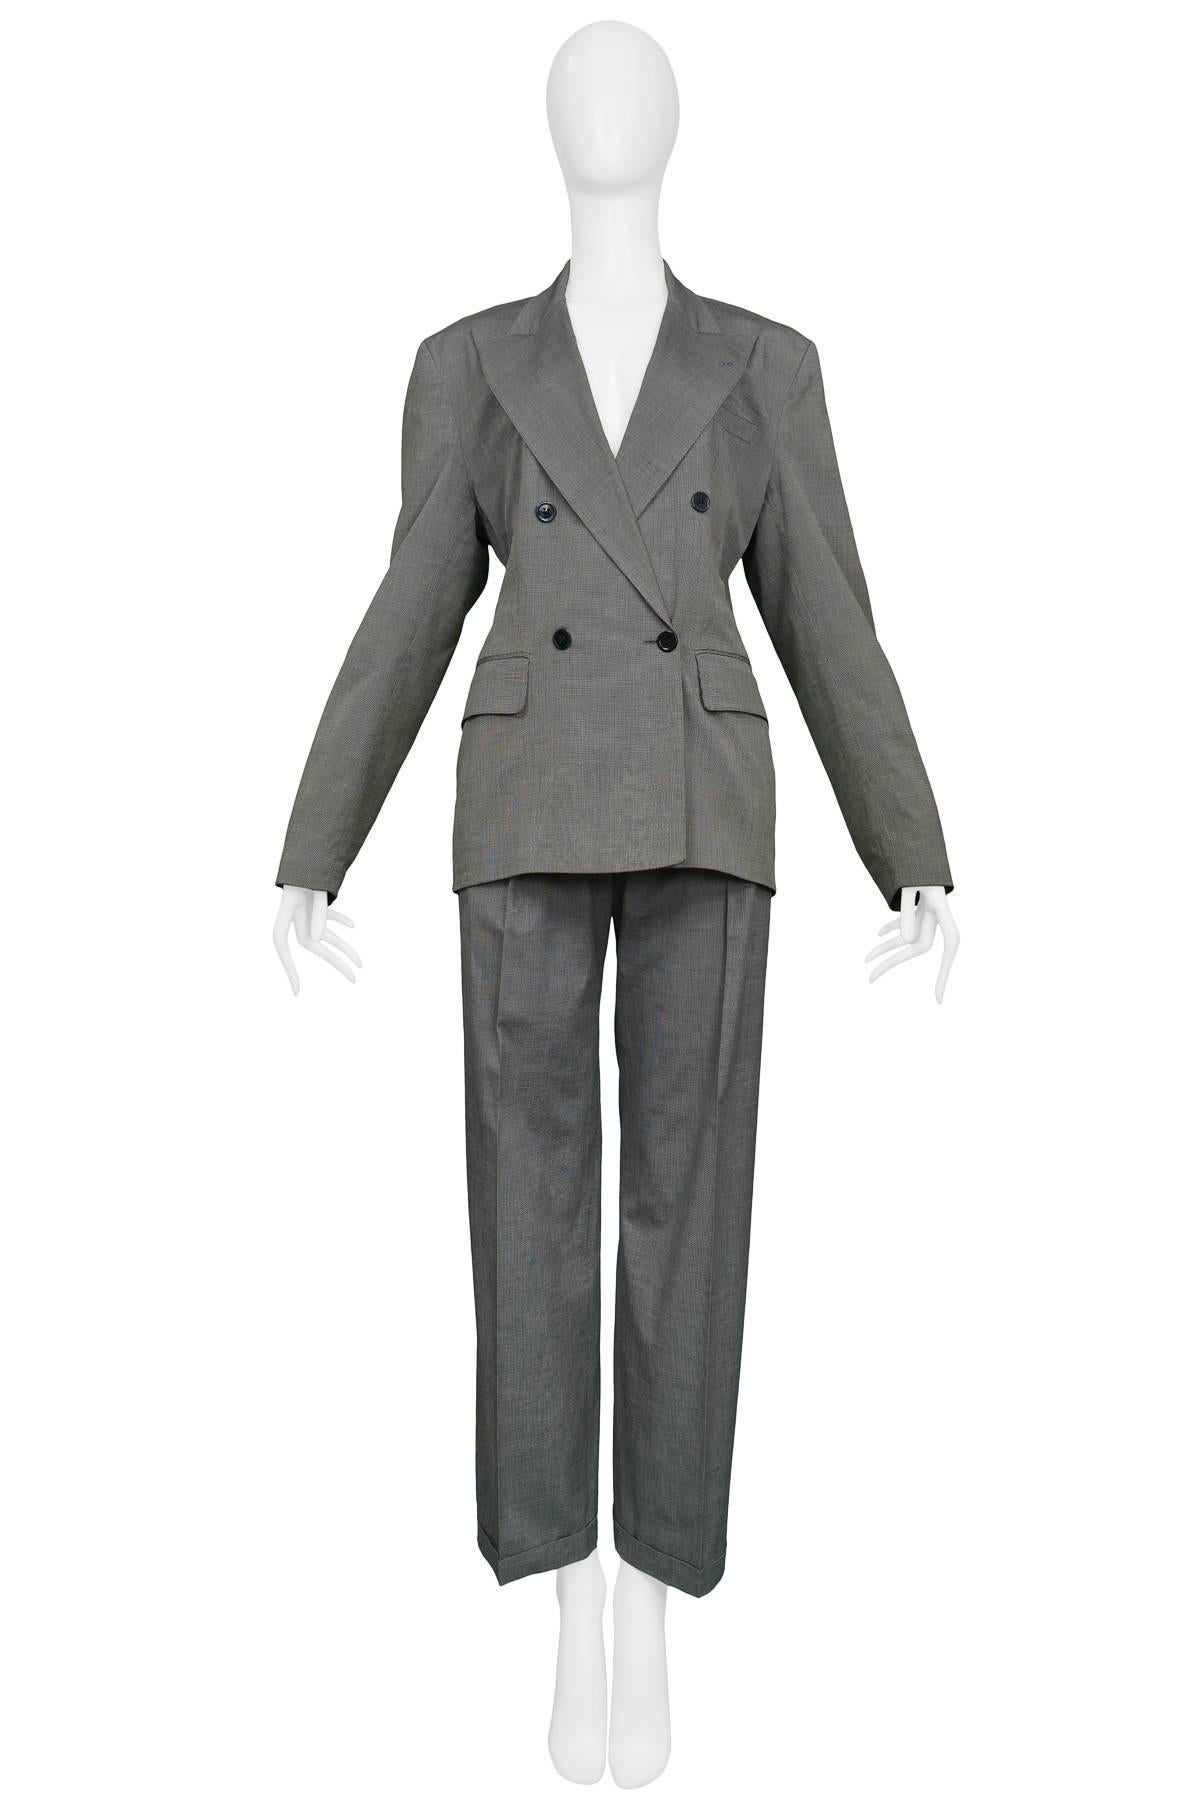 Vintage Azzedine Alaia grey, black & white cotton tiny check suit featuring a double breasted jacket with black buttons. Pleated front trouser style pants. 

